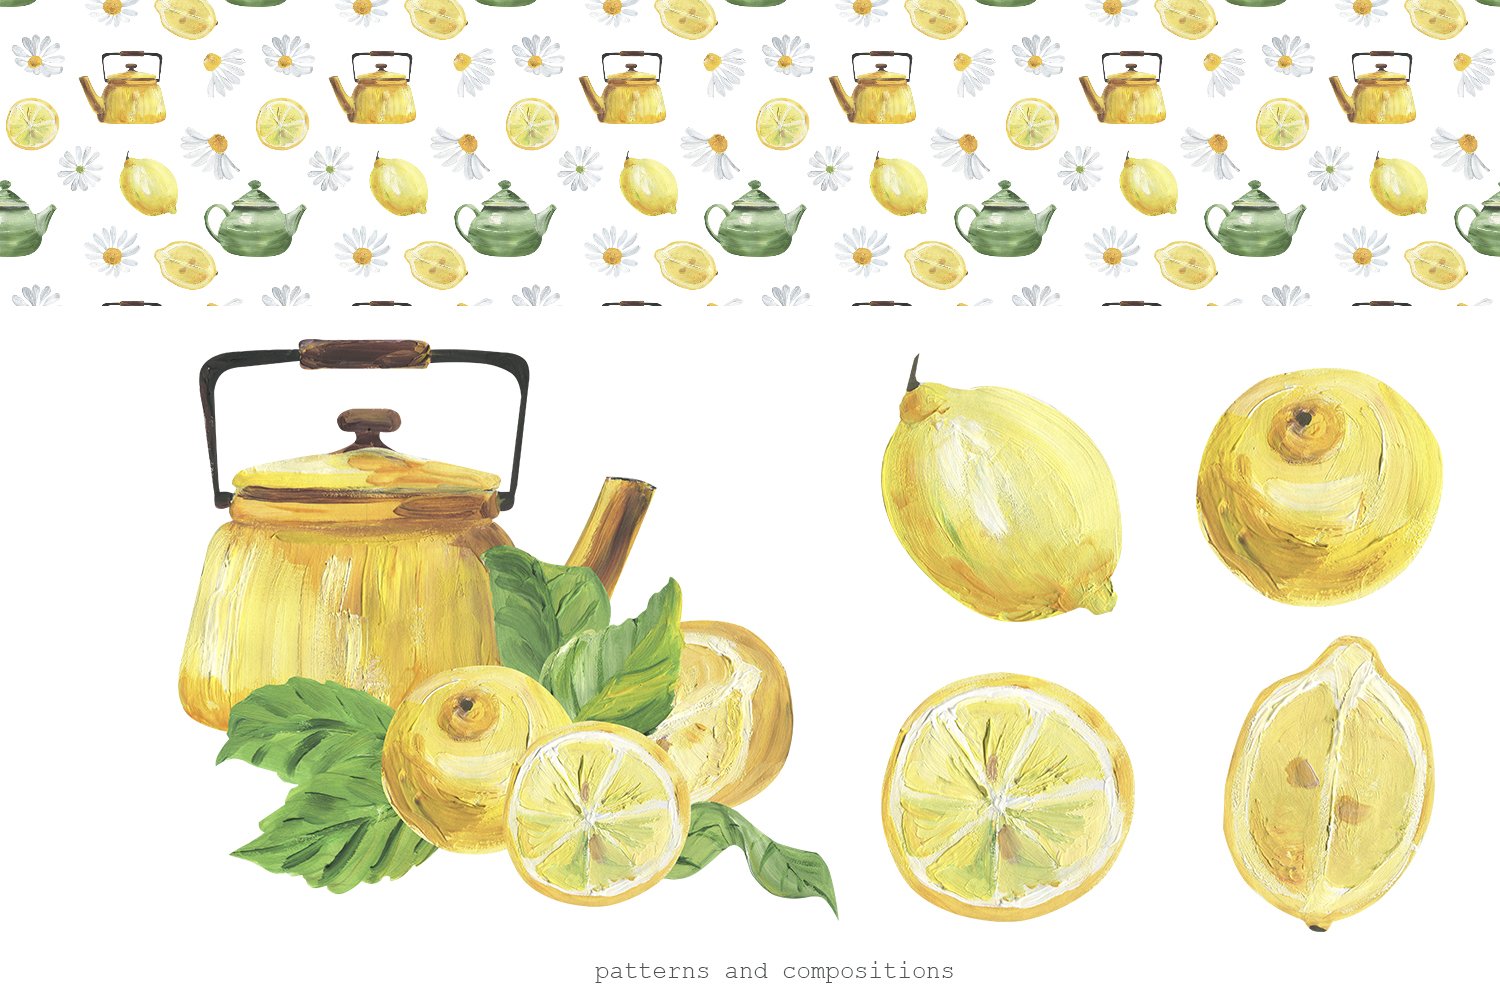 Classic watercolor teapot in yellow with lemon.